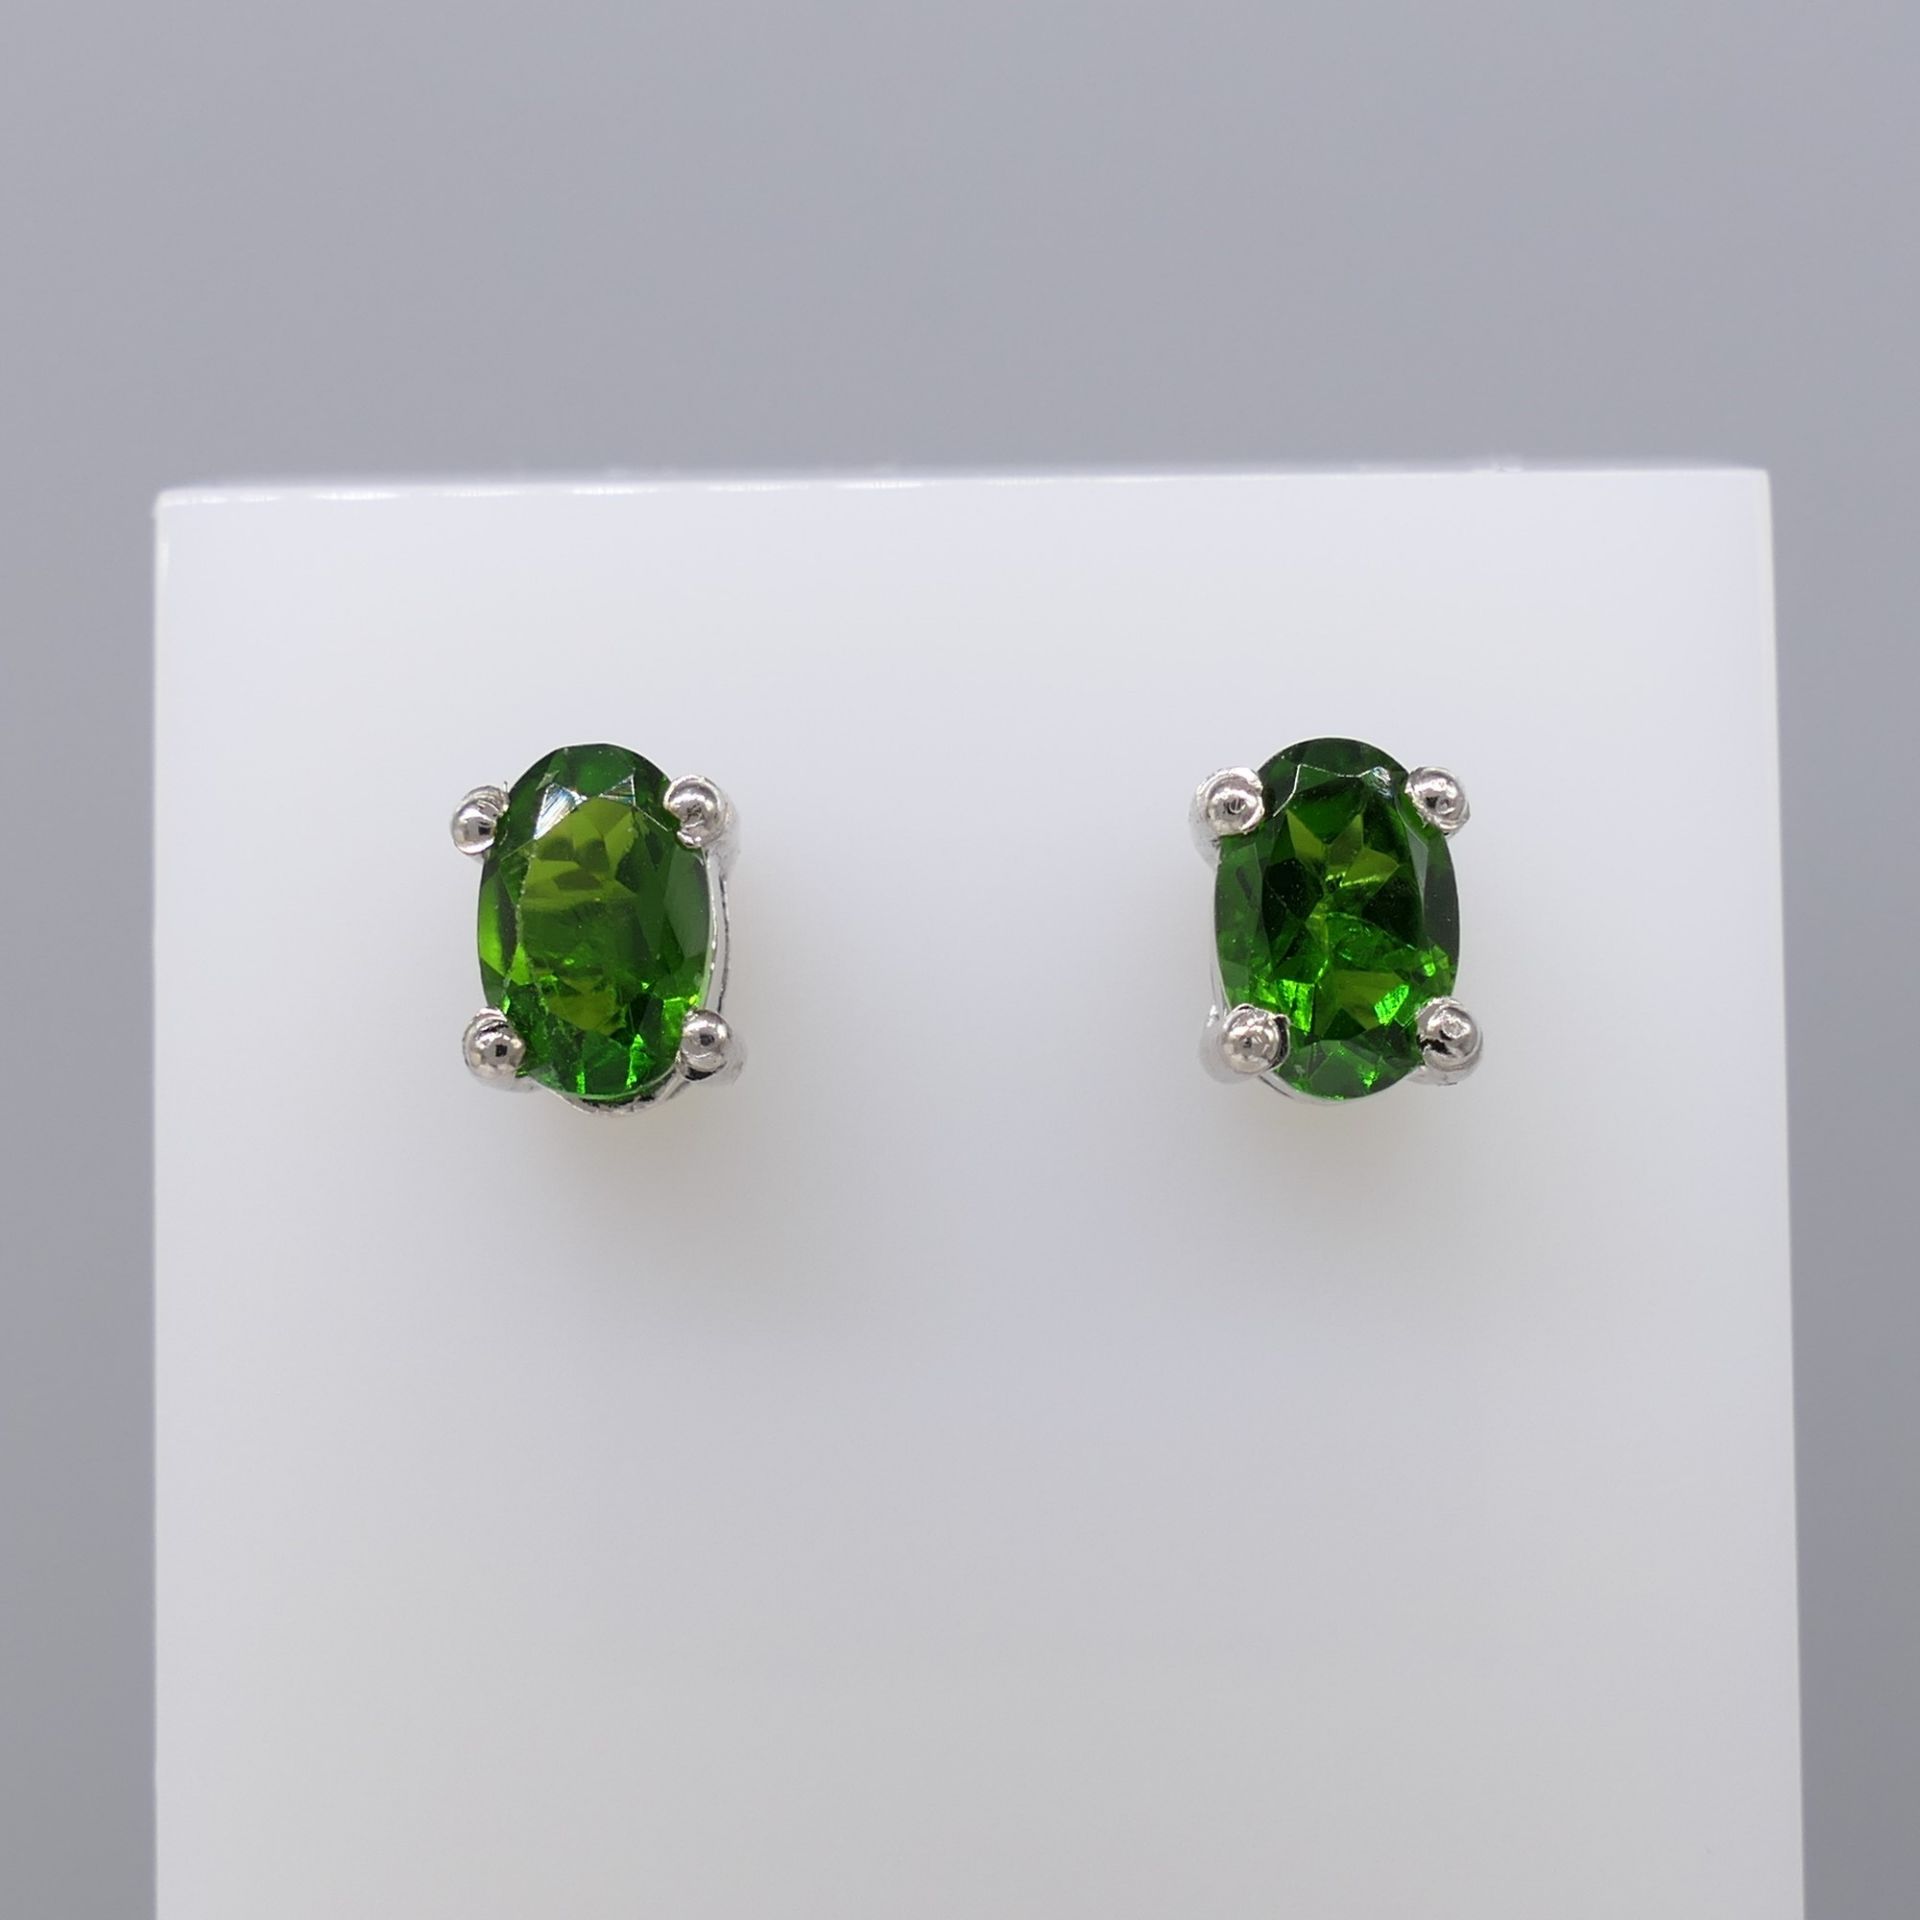 Pair of Natural Chrome Diopside Ear Studs In Sterling Silver - Image 2 of 6